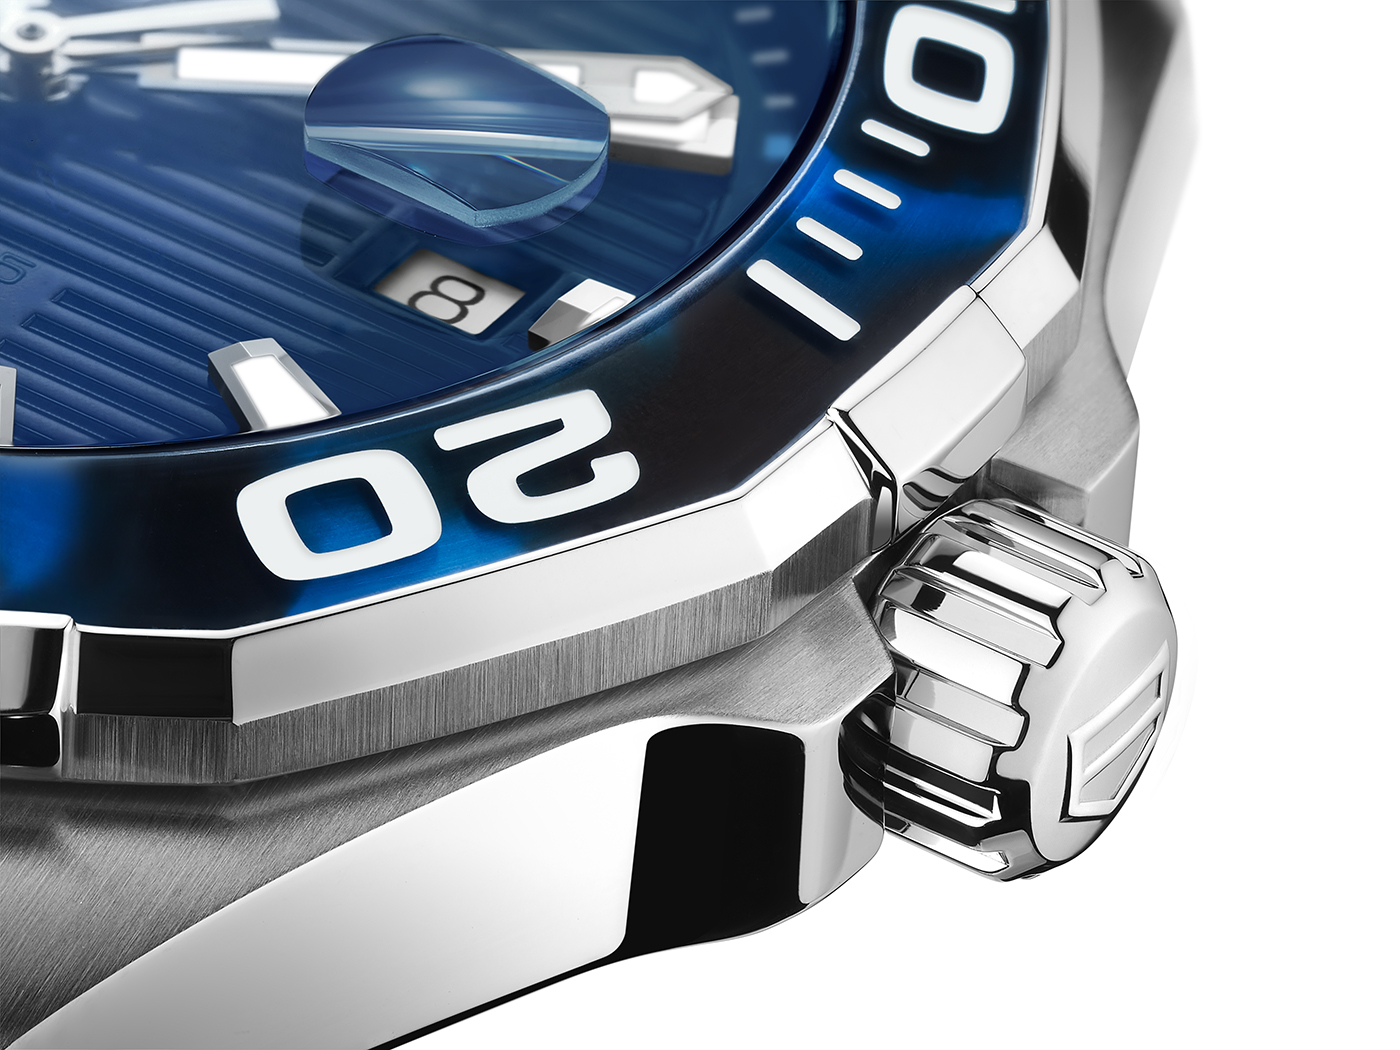 TAG Heuer Announces New Special Edition Aquaracer Models With Tortoise Shell Inspired Bezels Watch Releases 